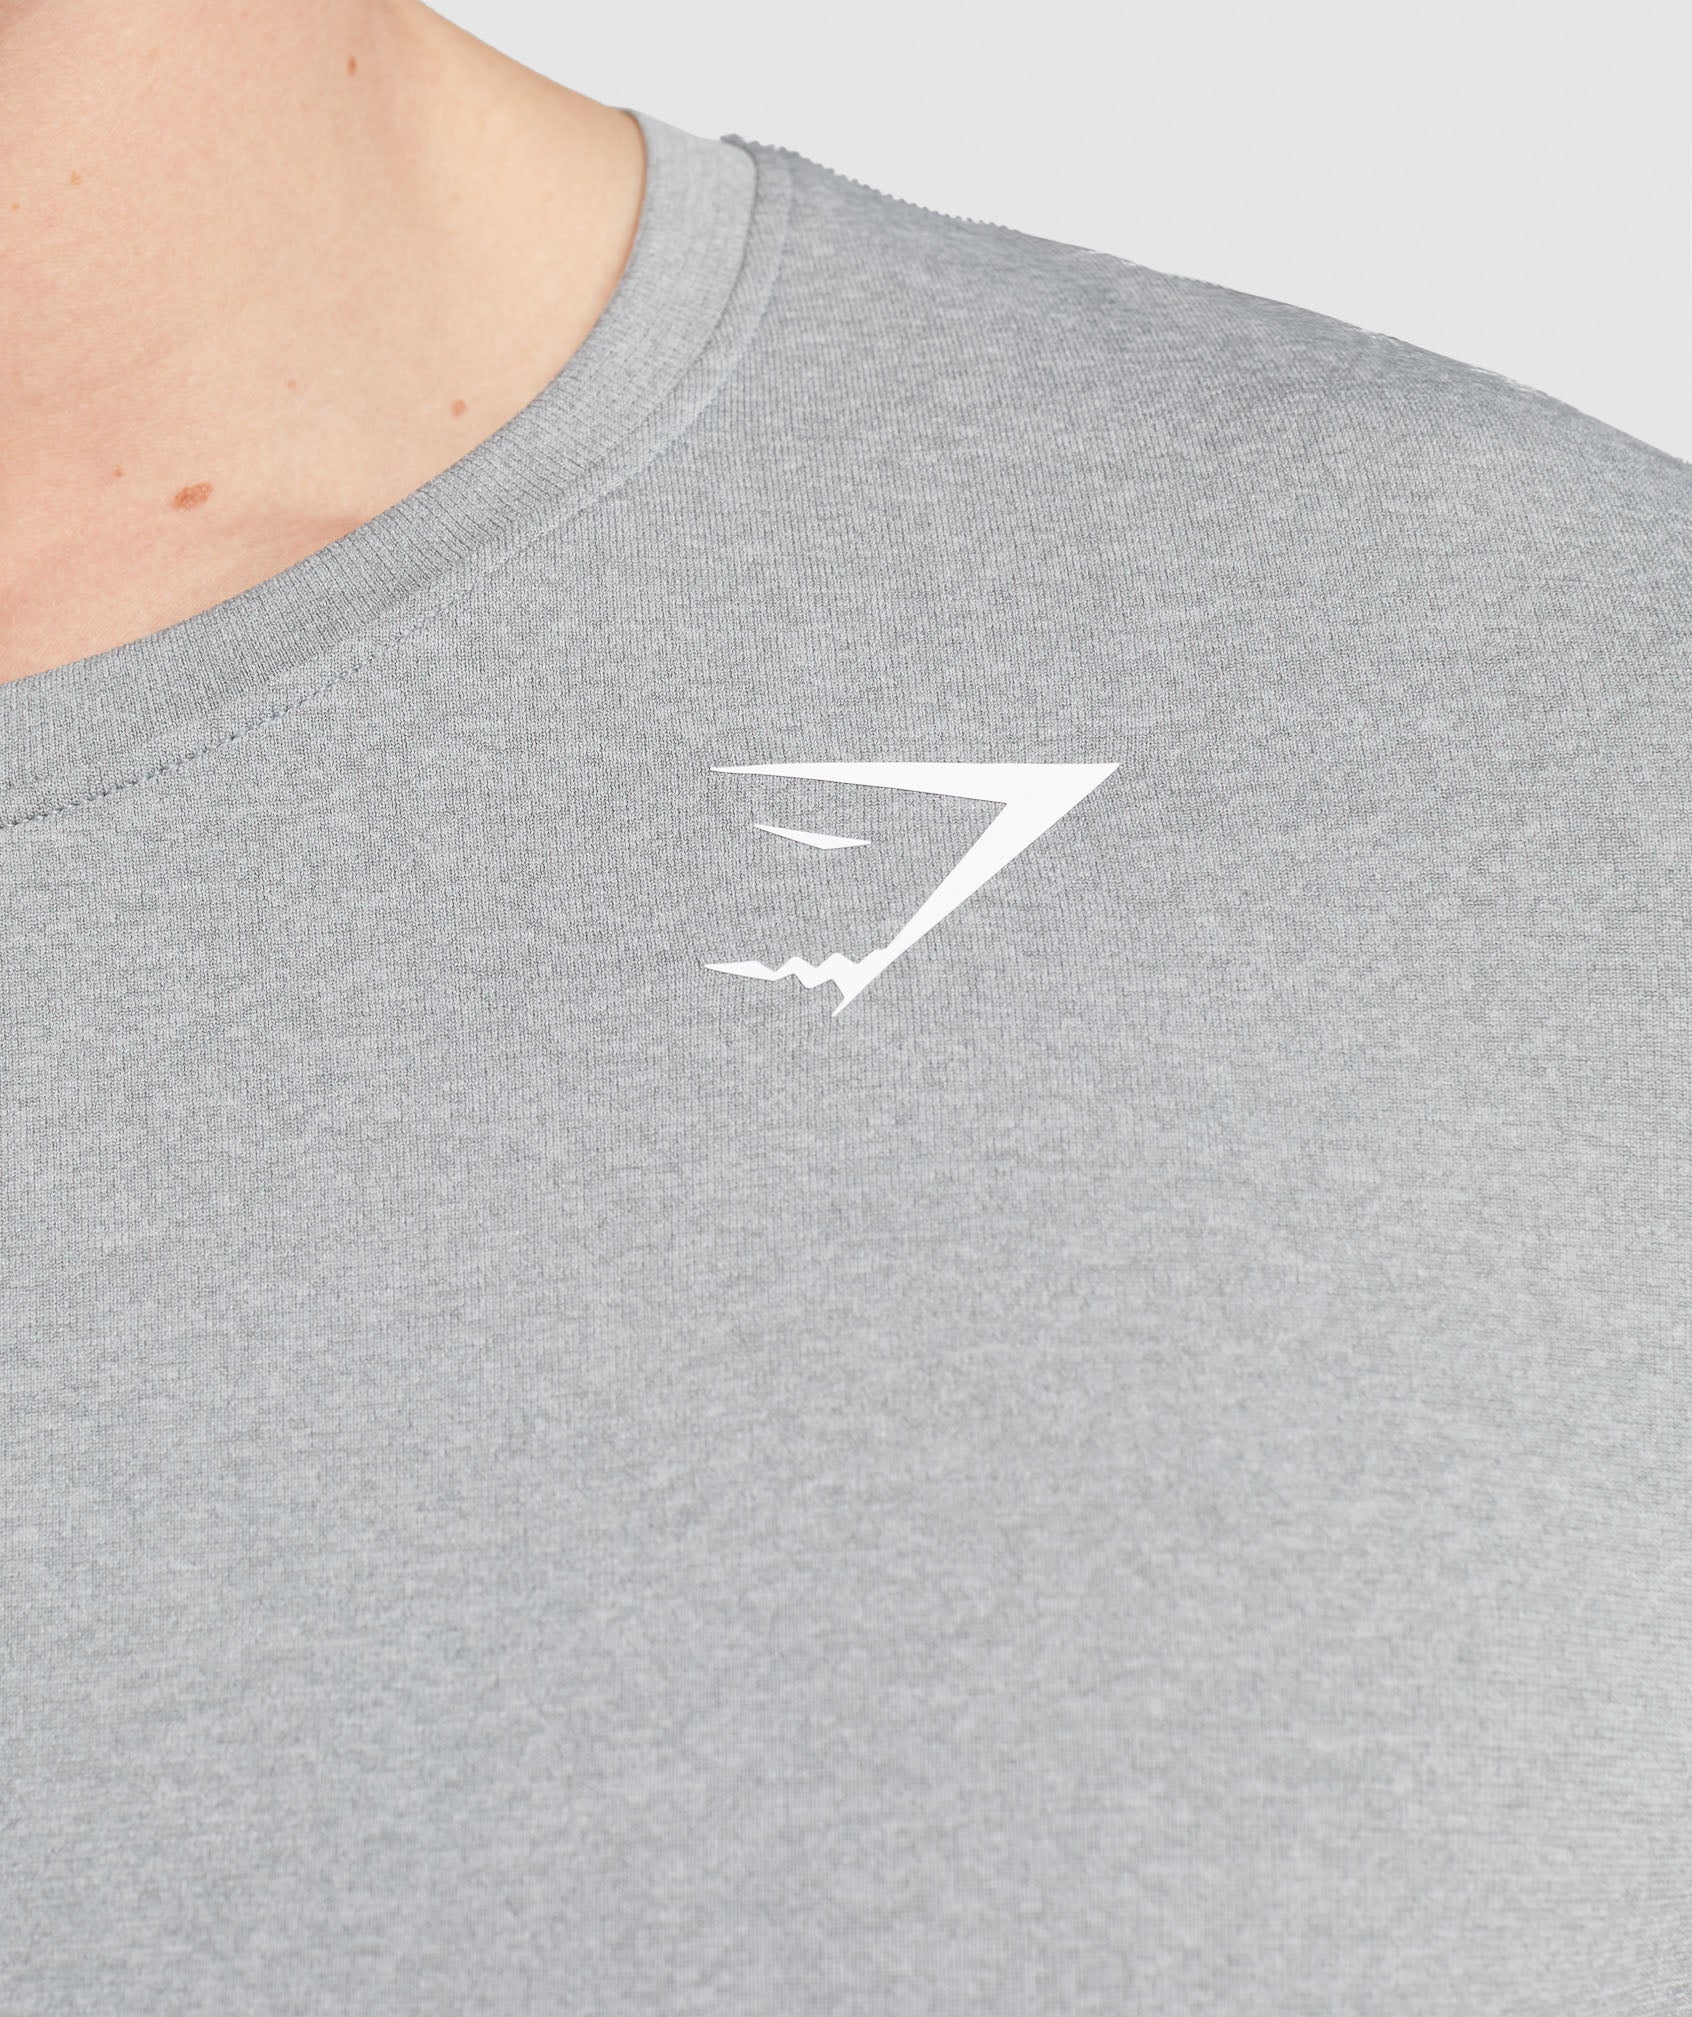 Arrival Seamless T-Shirt in Grey